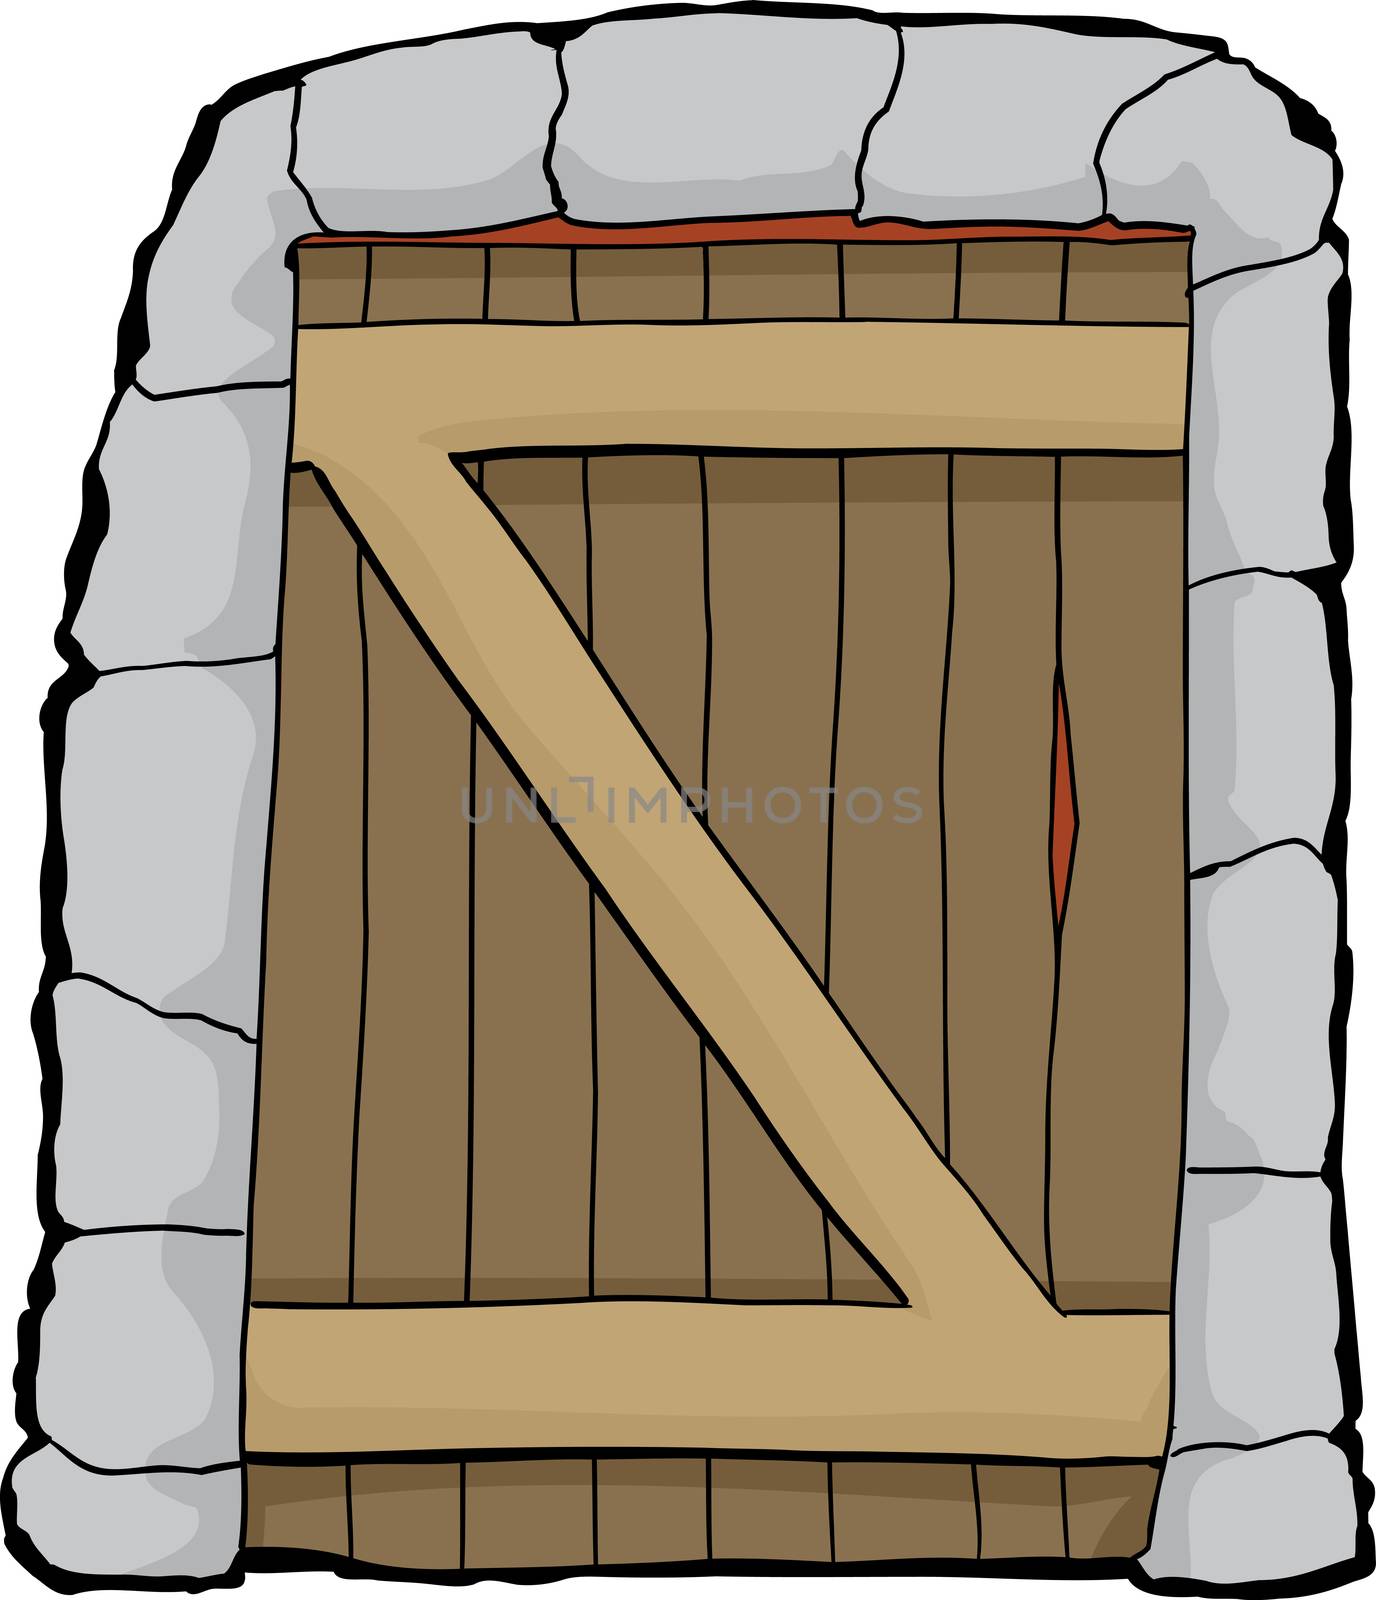 Single closed dungeon doorway over white background